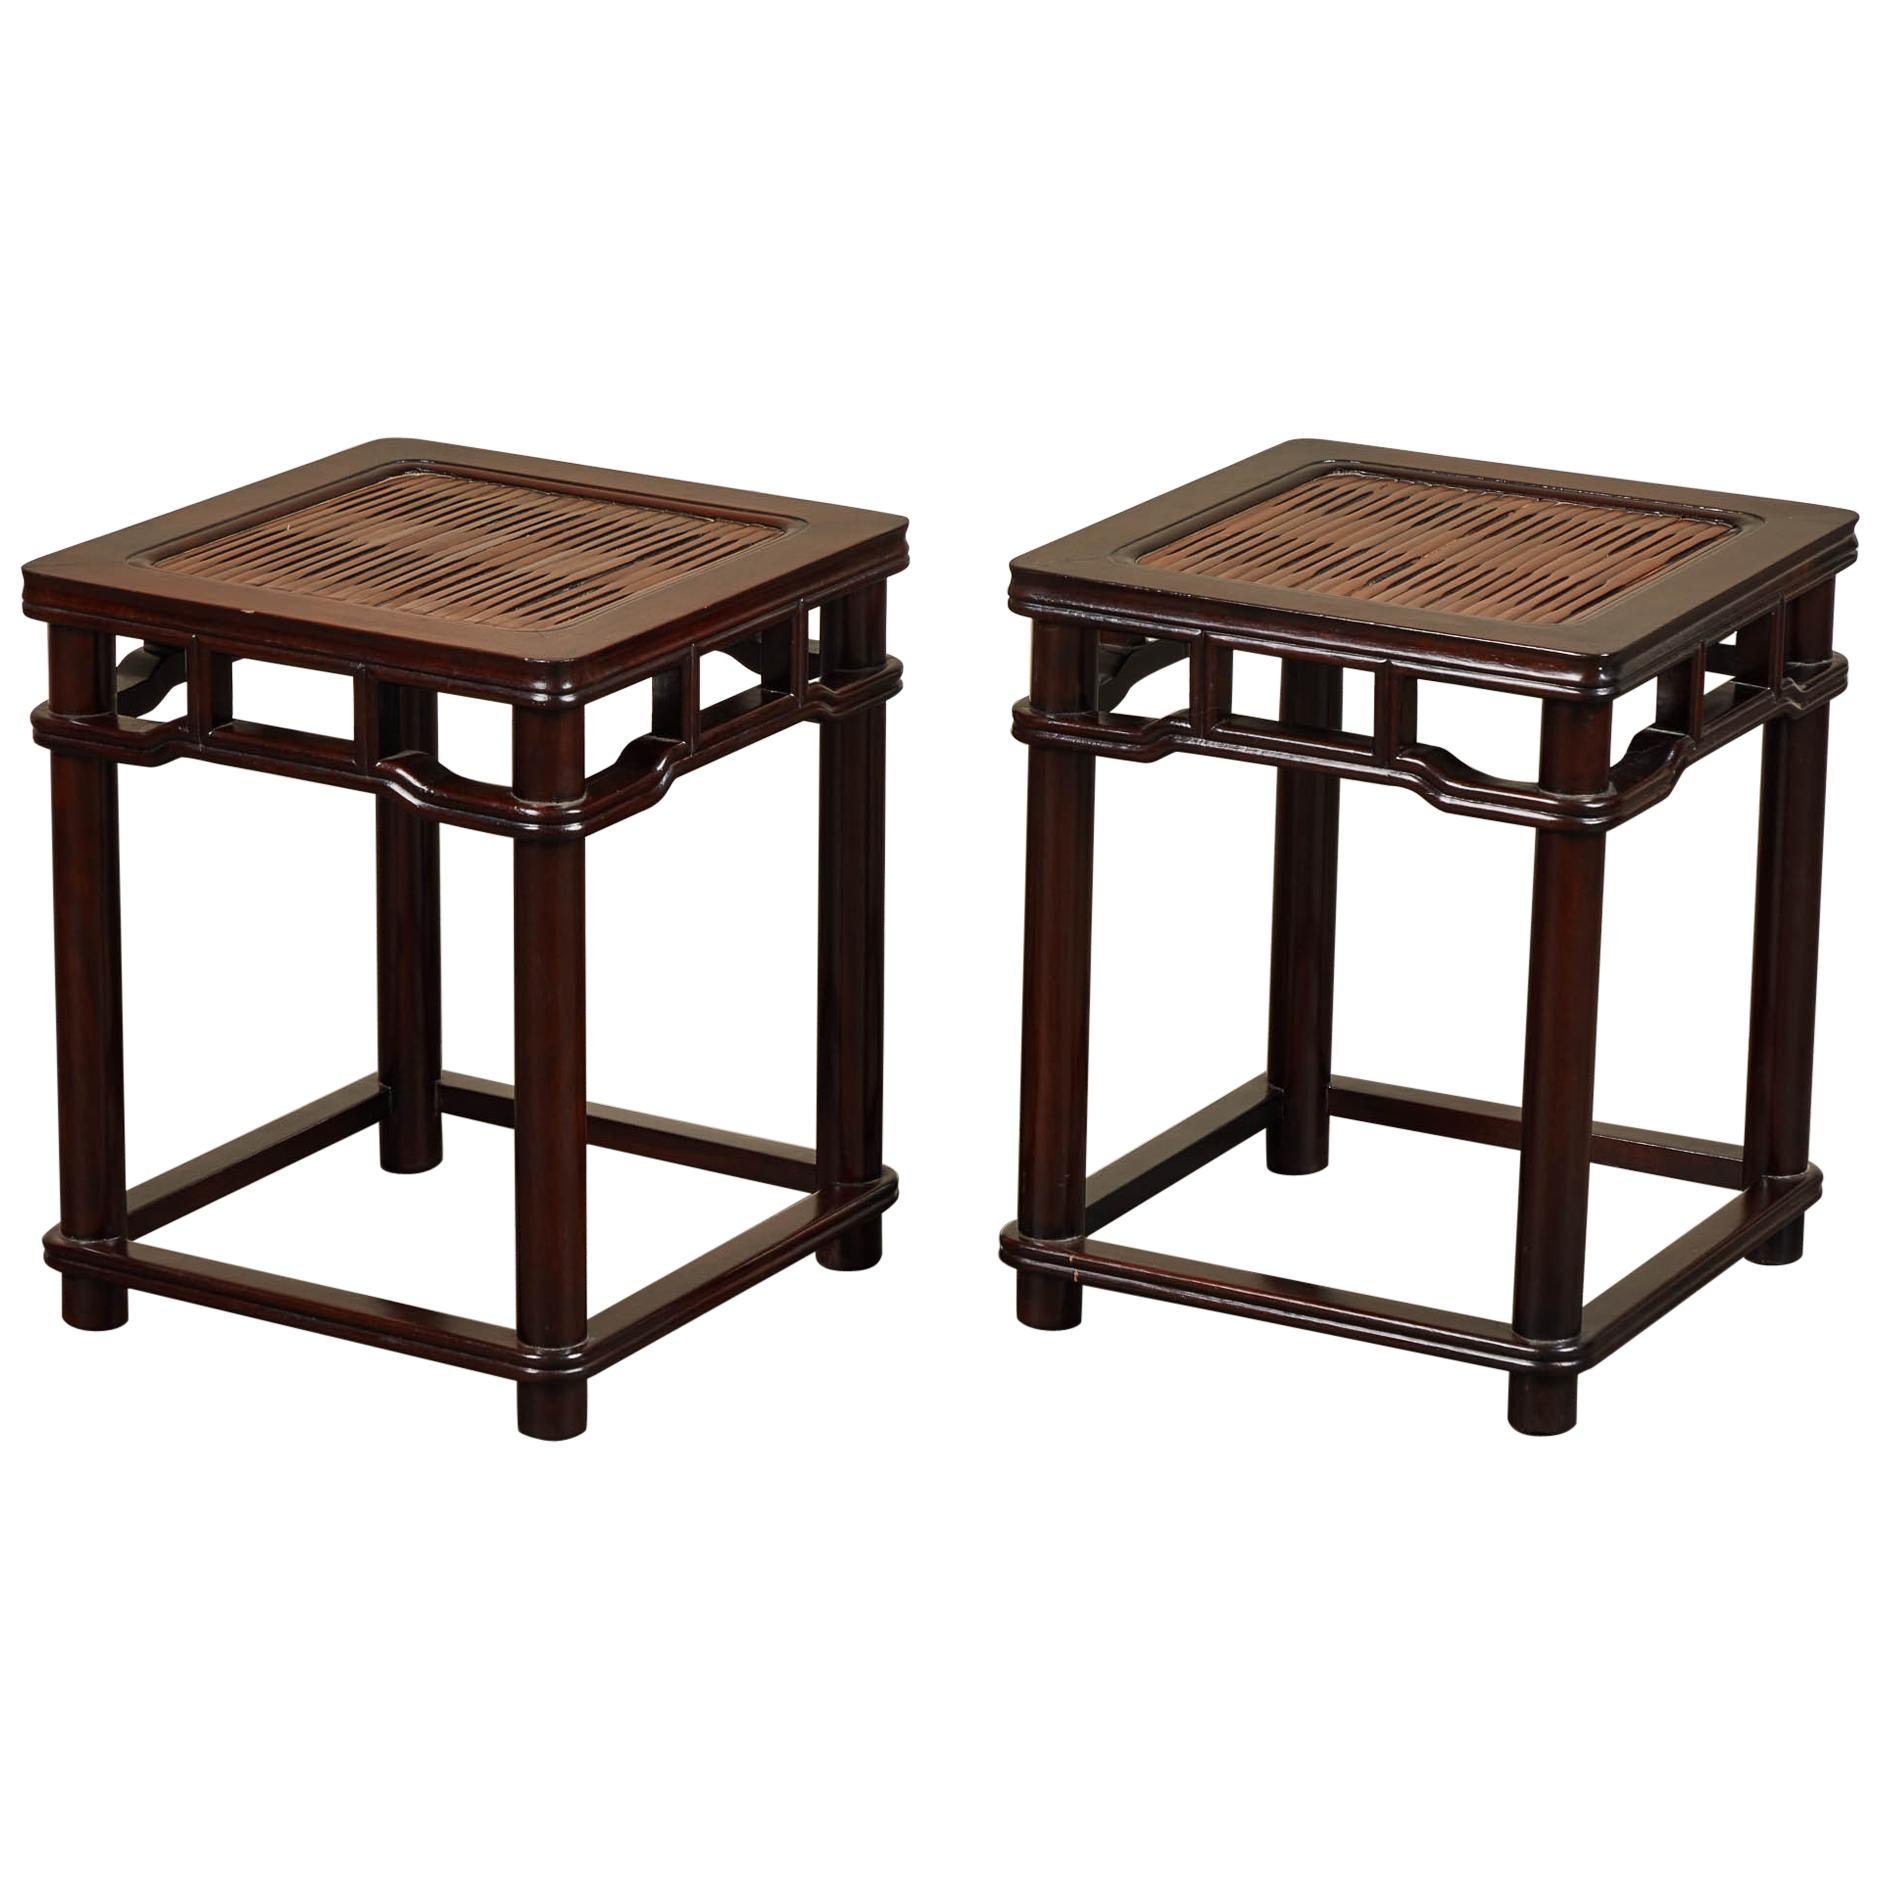 Pair of 18th Century Chinese Iron Wood Tables W/ Slated Bamboo Tops